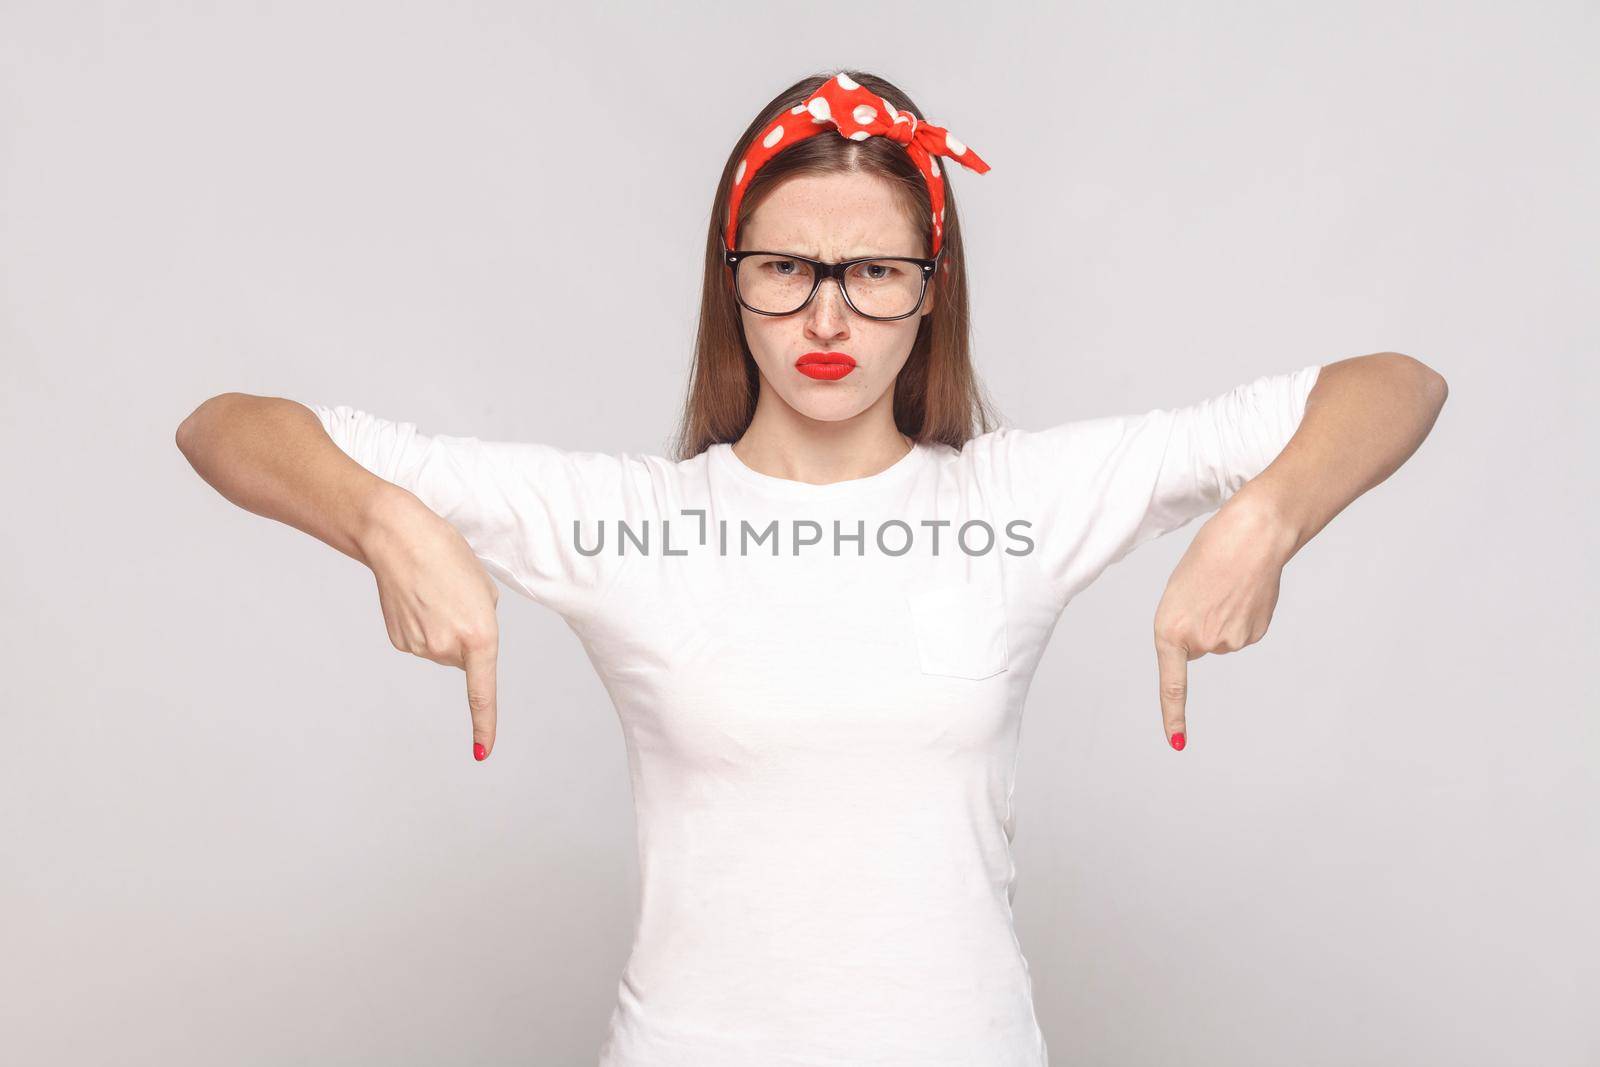 must be here right now. bossy anger portrait of beautiful emotional young woman in white t-shirt with freckles, glasses, red lips and head band. indoor studio shot, isolated on light gray background.